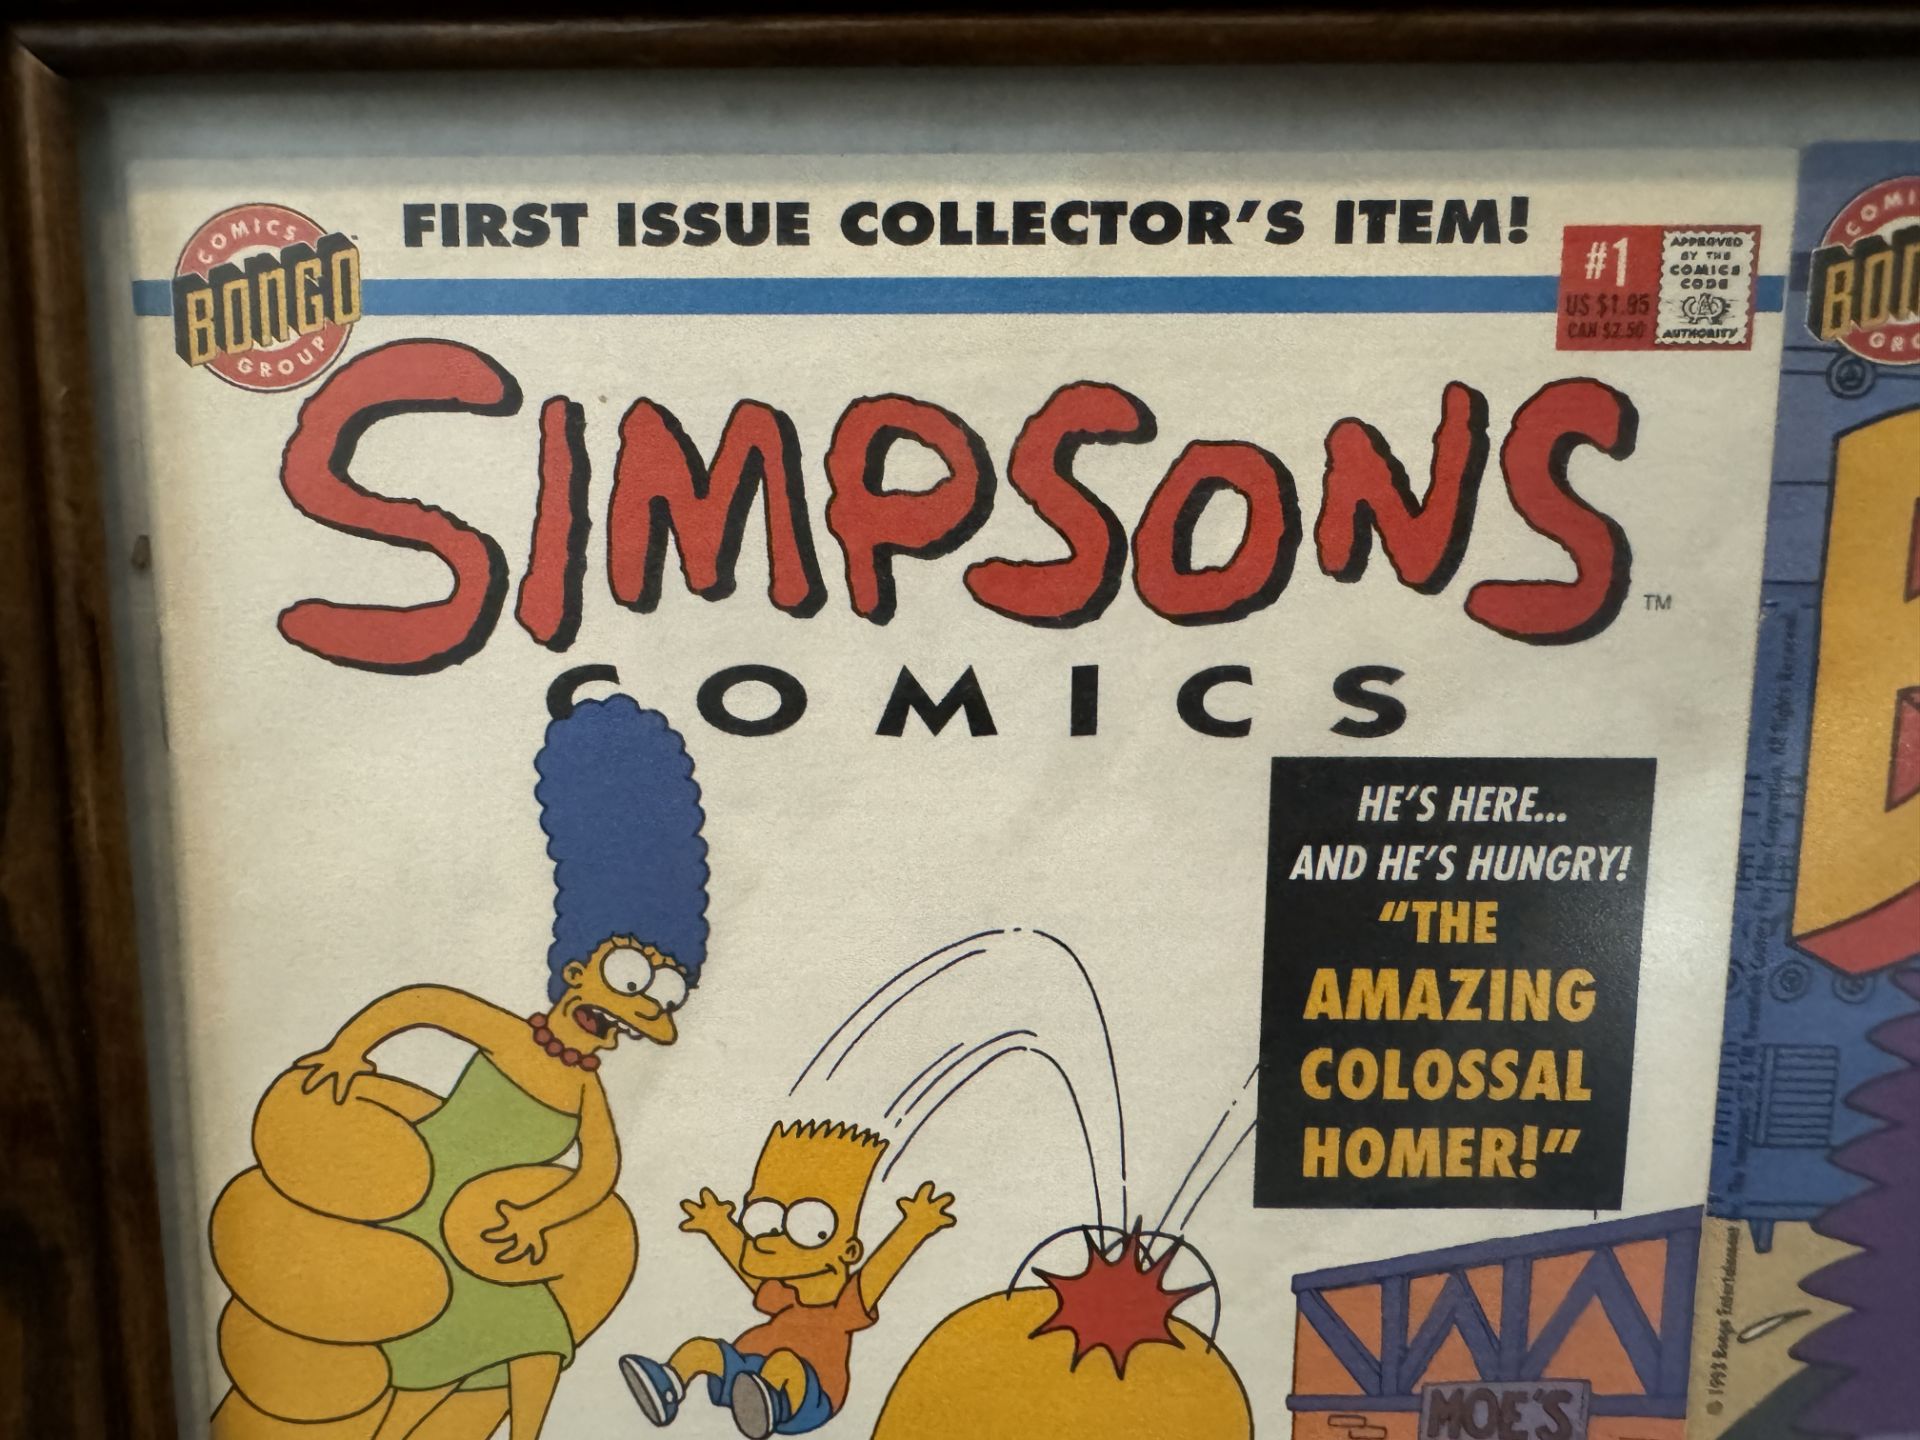 BONGO COMICS FRAME 1993 THE SIMPSONS POSTER - Image 2 of 4